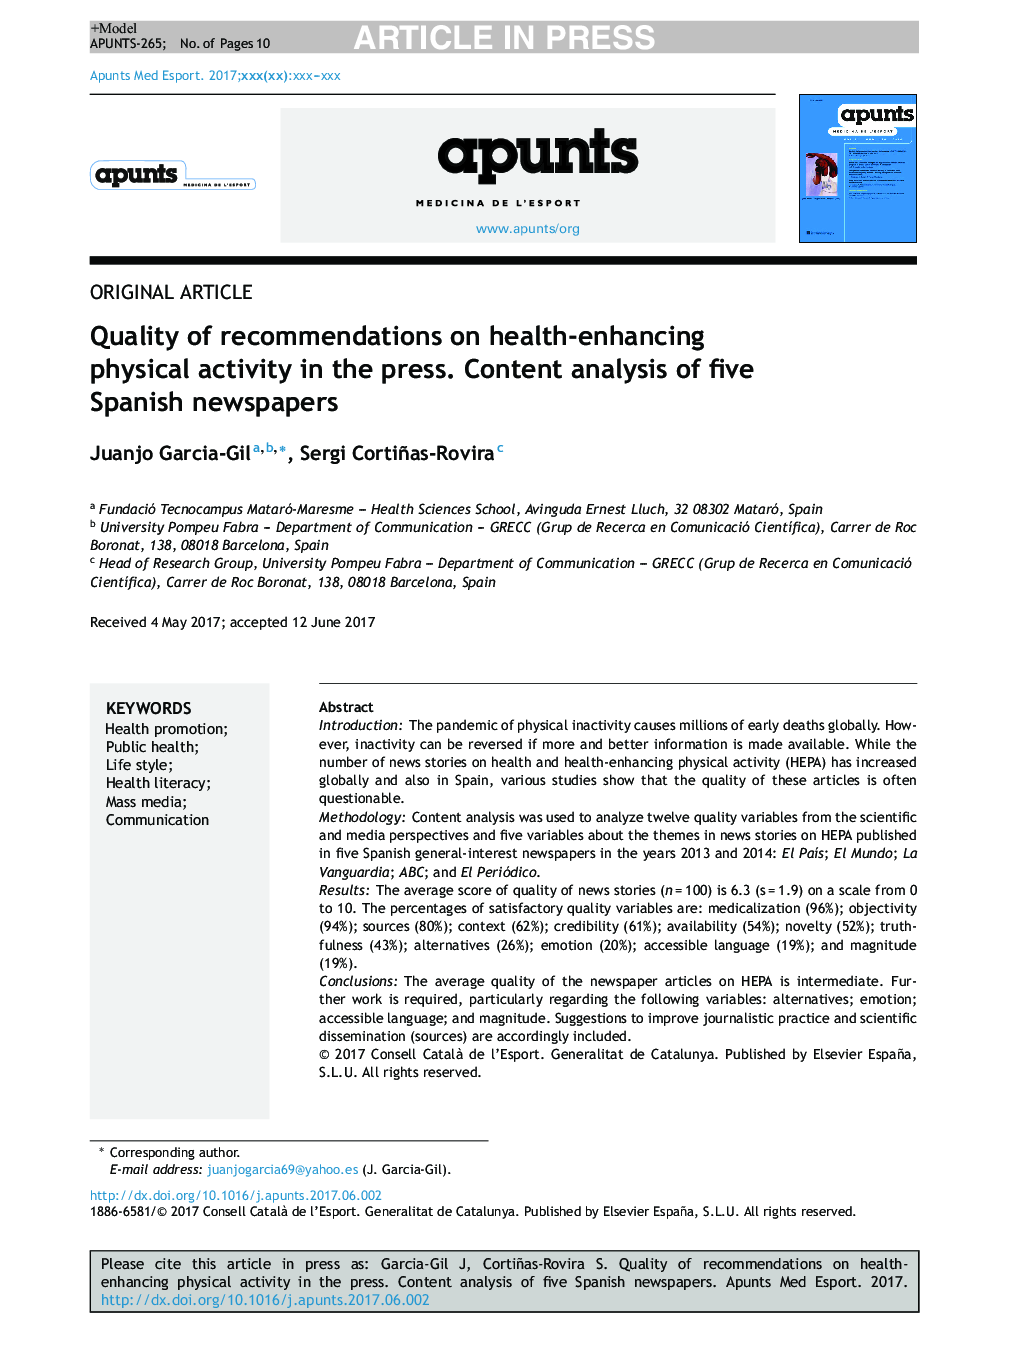 Quality of recommendations on health-enhancing physical activity in the press. Content analysis of five Spanish newspapers